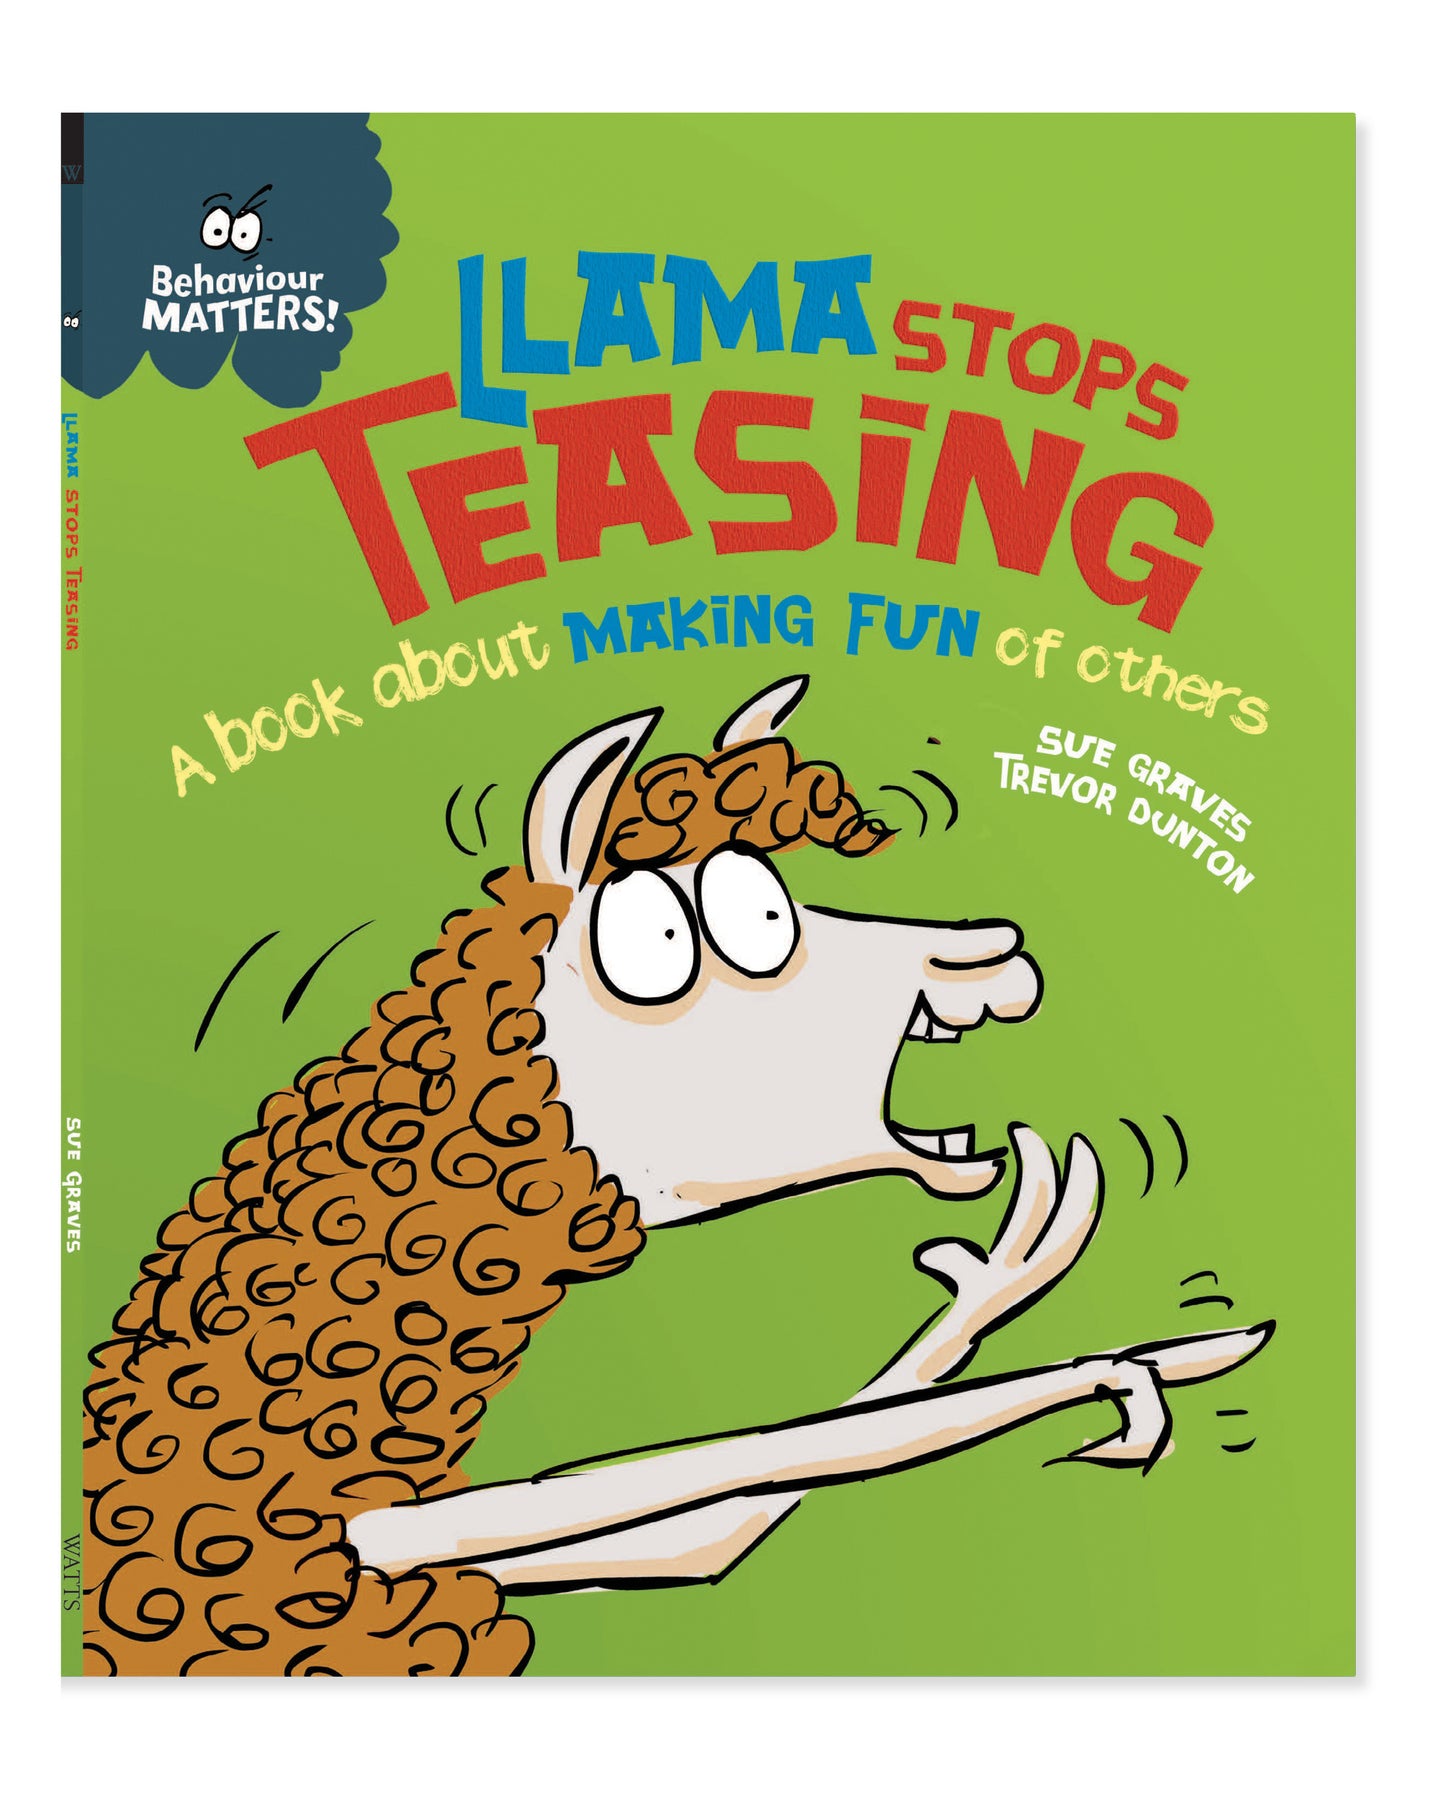 Experiences Matter! Llama Stops Teasing by Sue Graves and Trevor Dunton